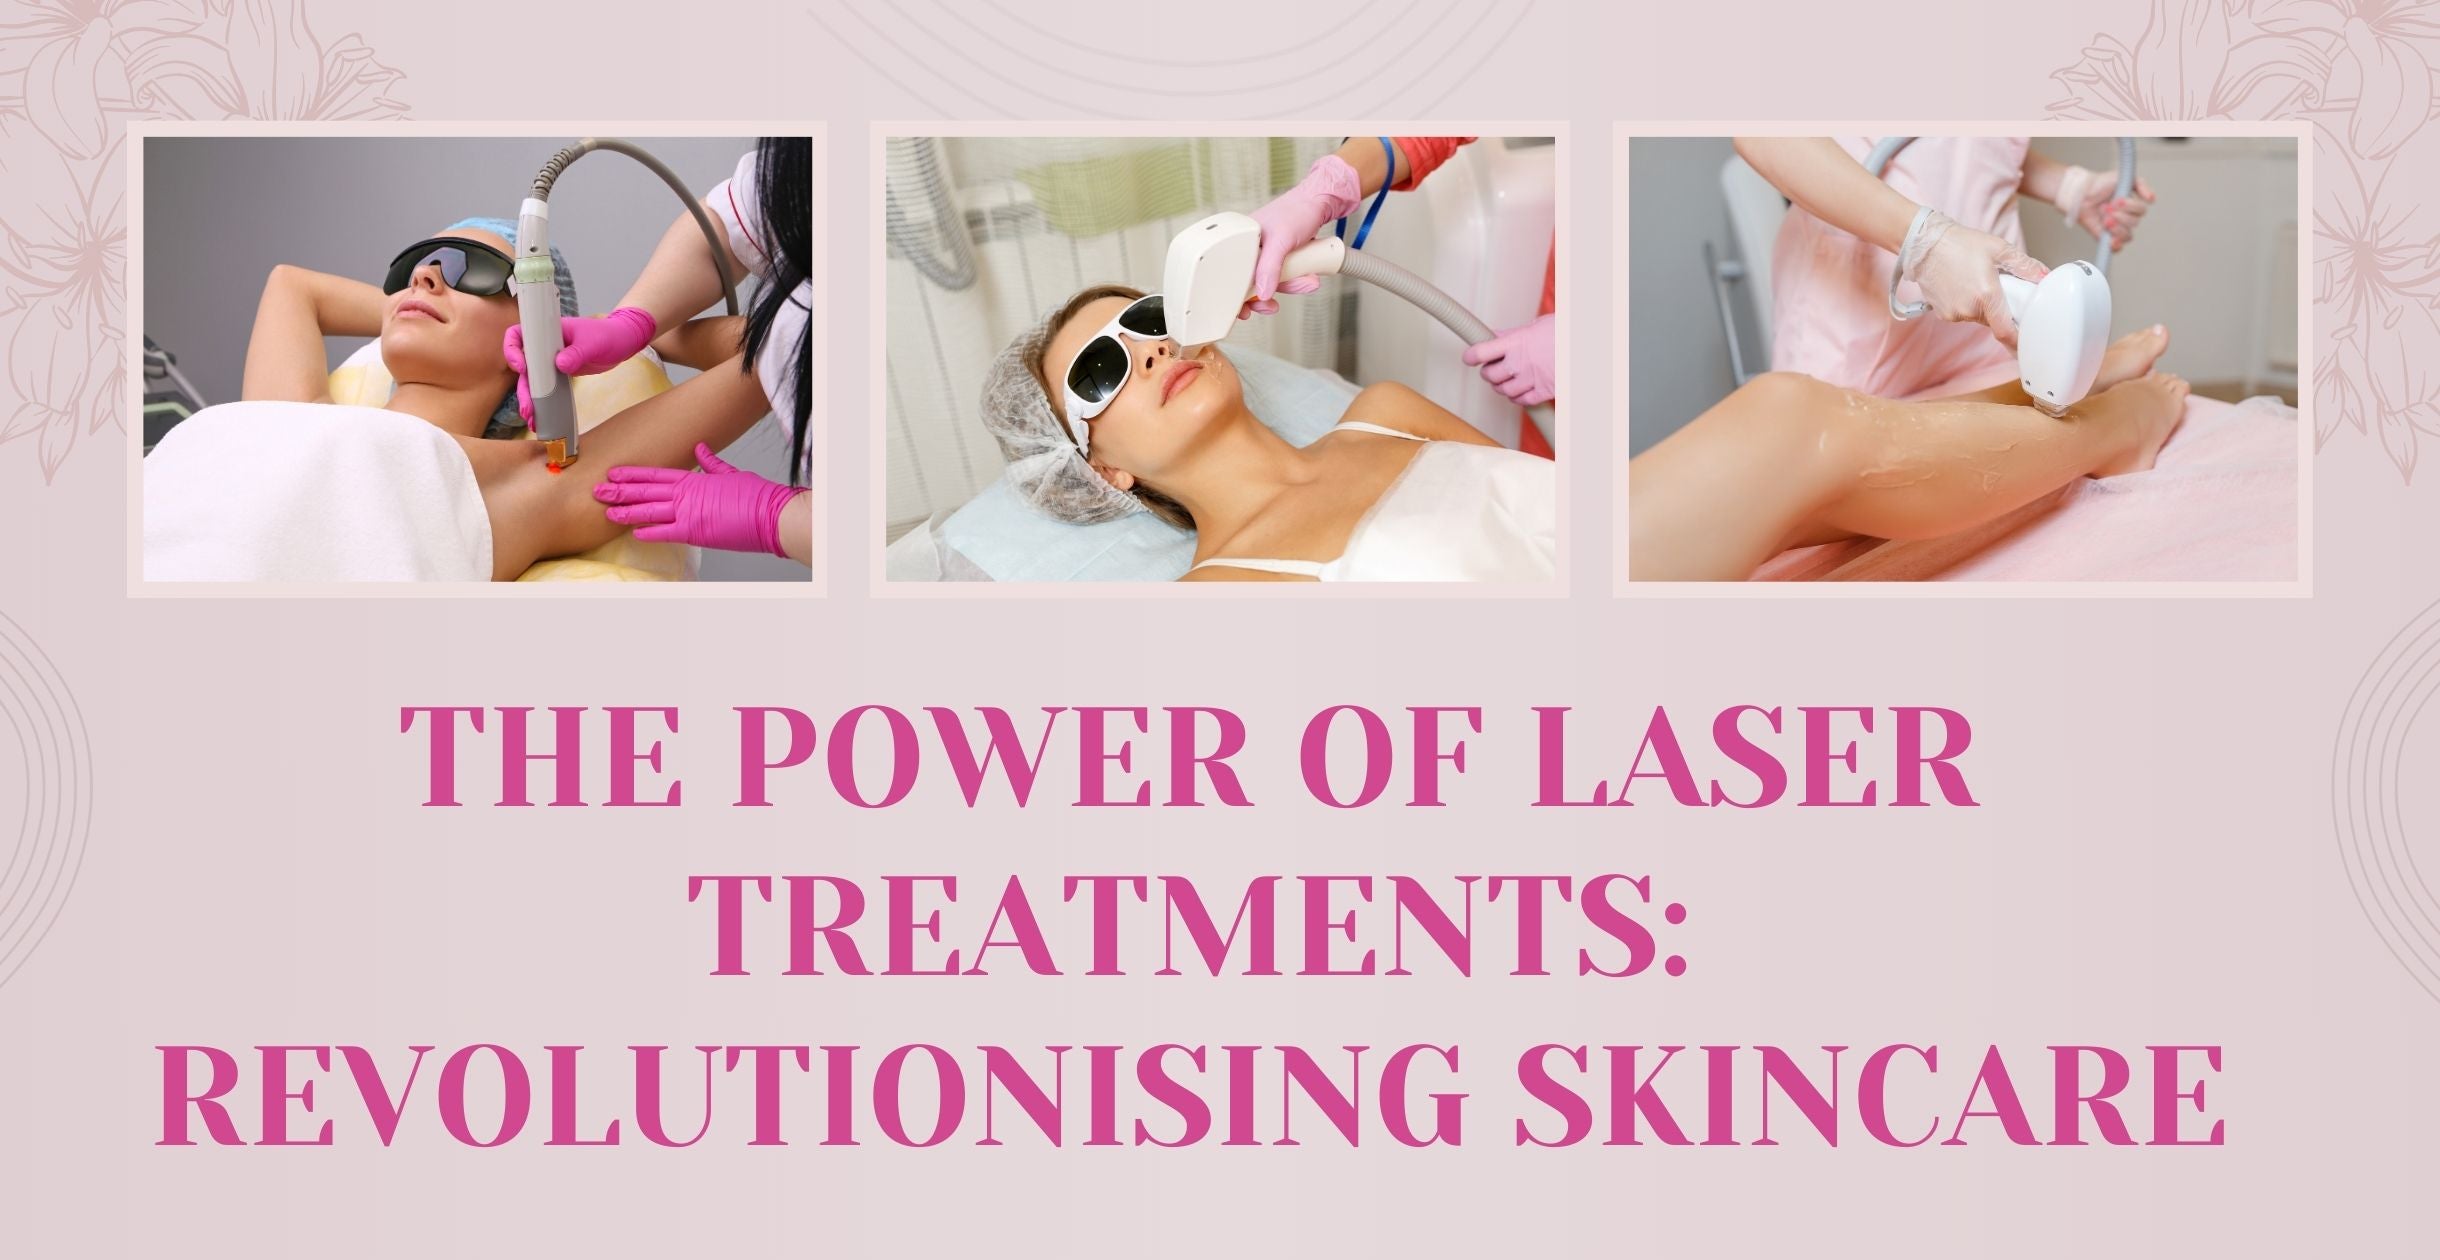 The Power of Laser Treatments: Revolutionising Skincare